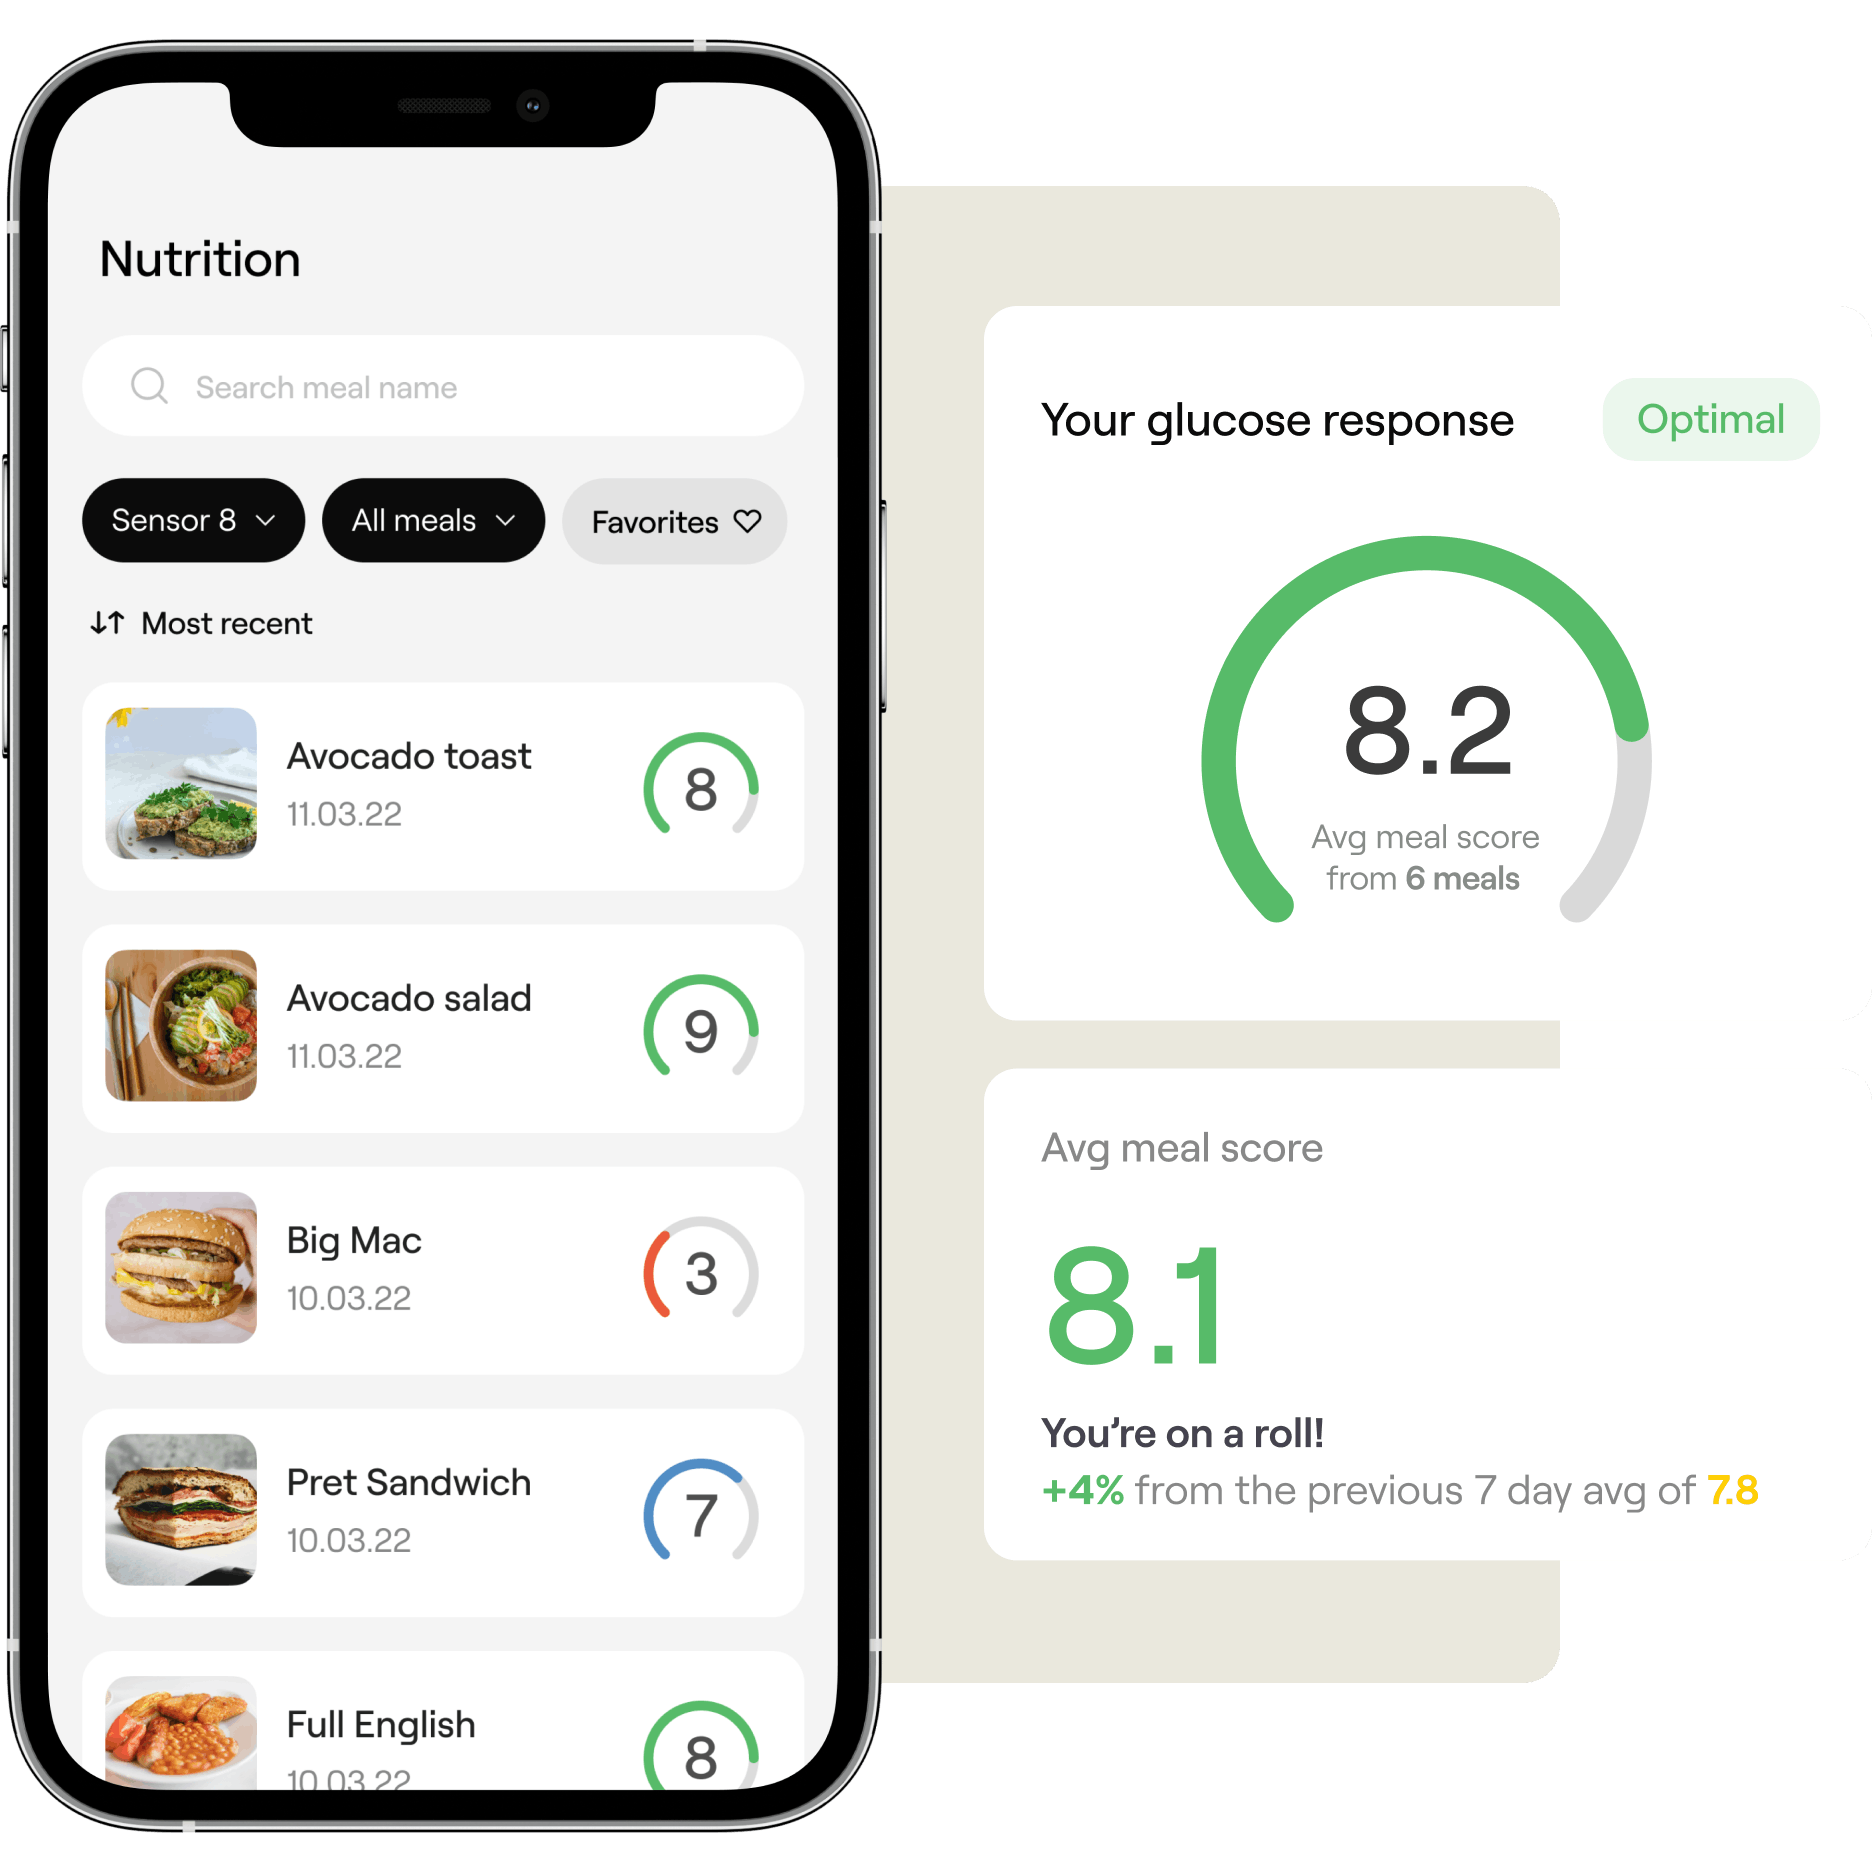 meal scores and daily scores from blood sugar